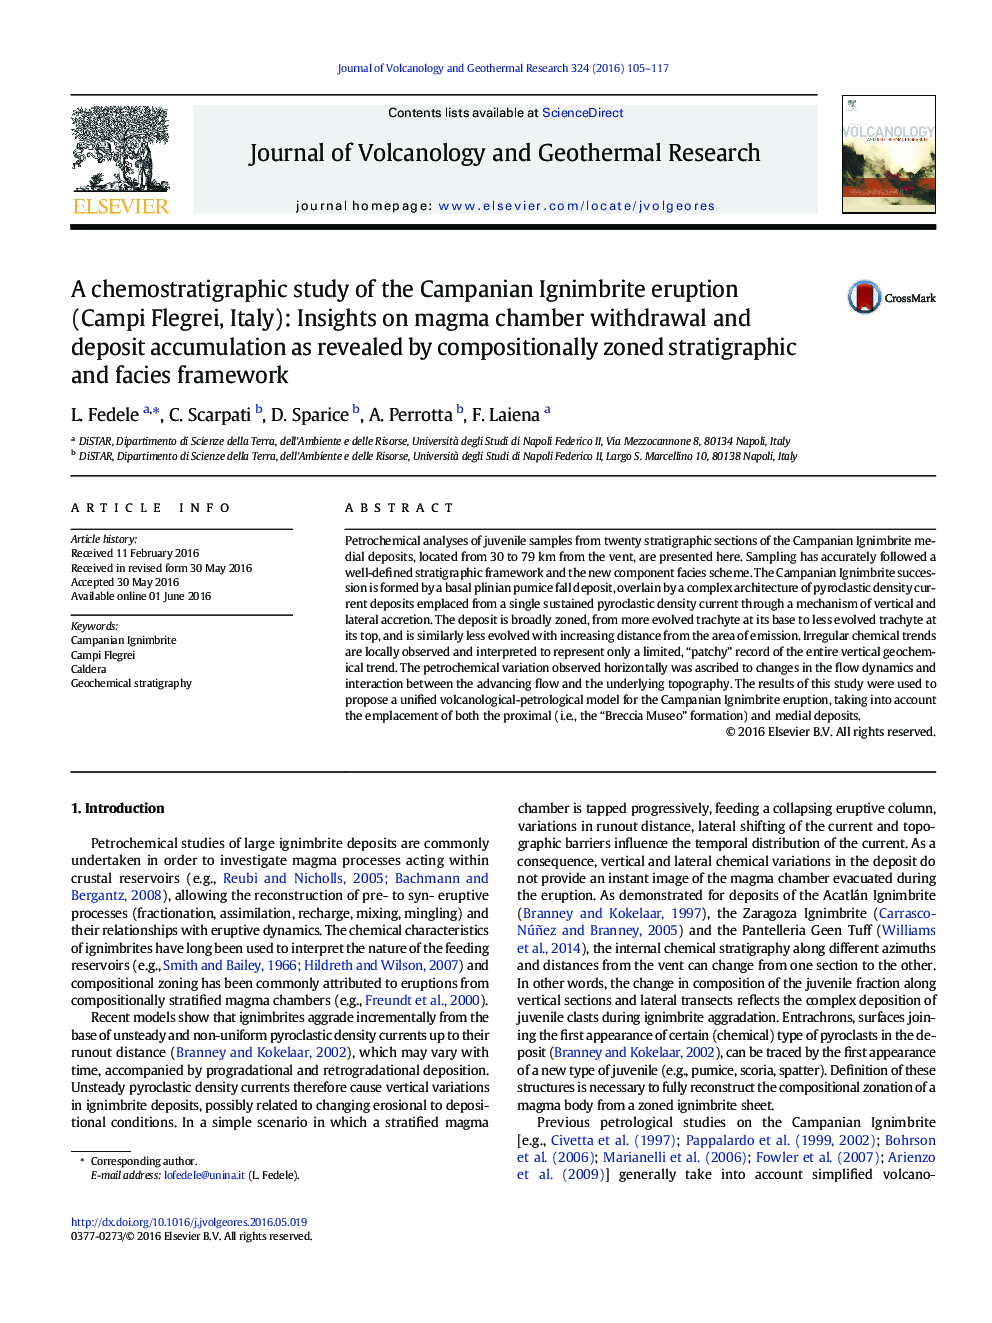 A chemostratigraphic study of the Campanian Ignimbrite eruption (Campi Flegrei, Italy): Insights on magma chamber withdrawal and deposit accumulation as revealed by compositionally zoned stratigraphic and facies framework